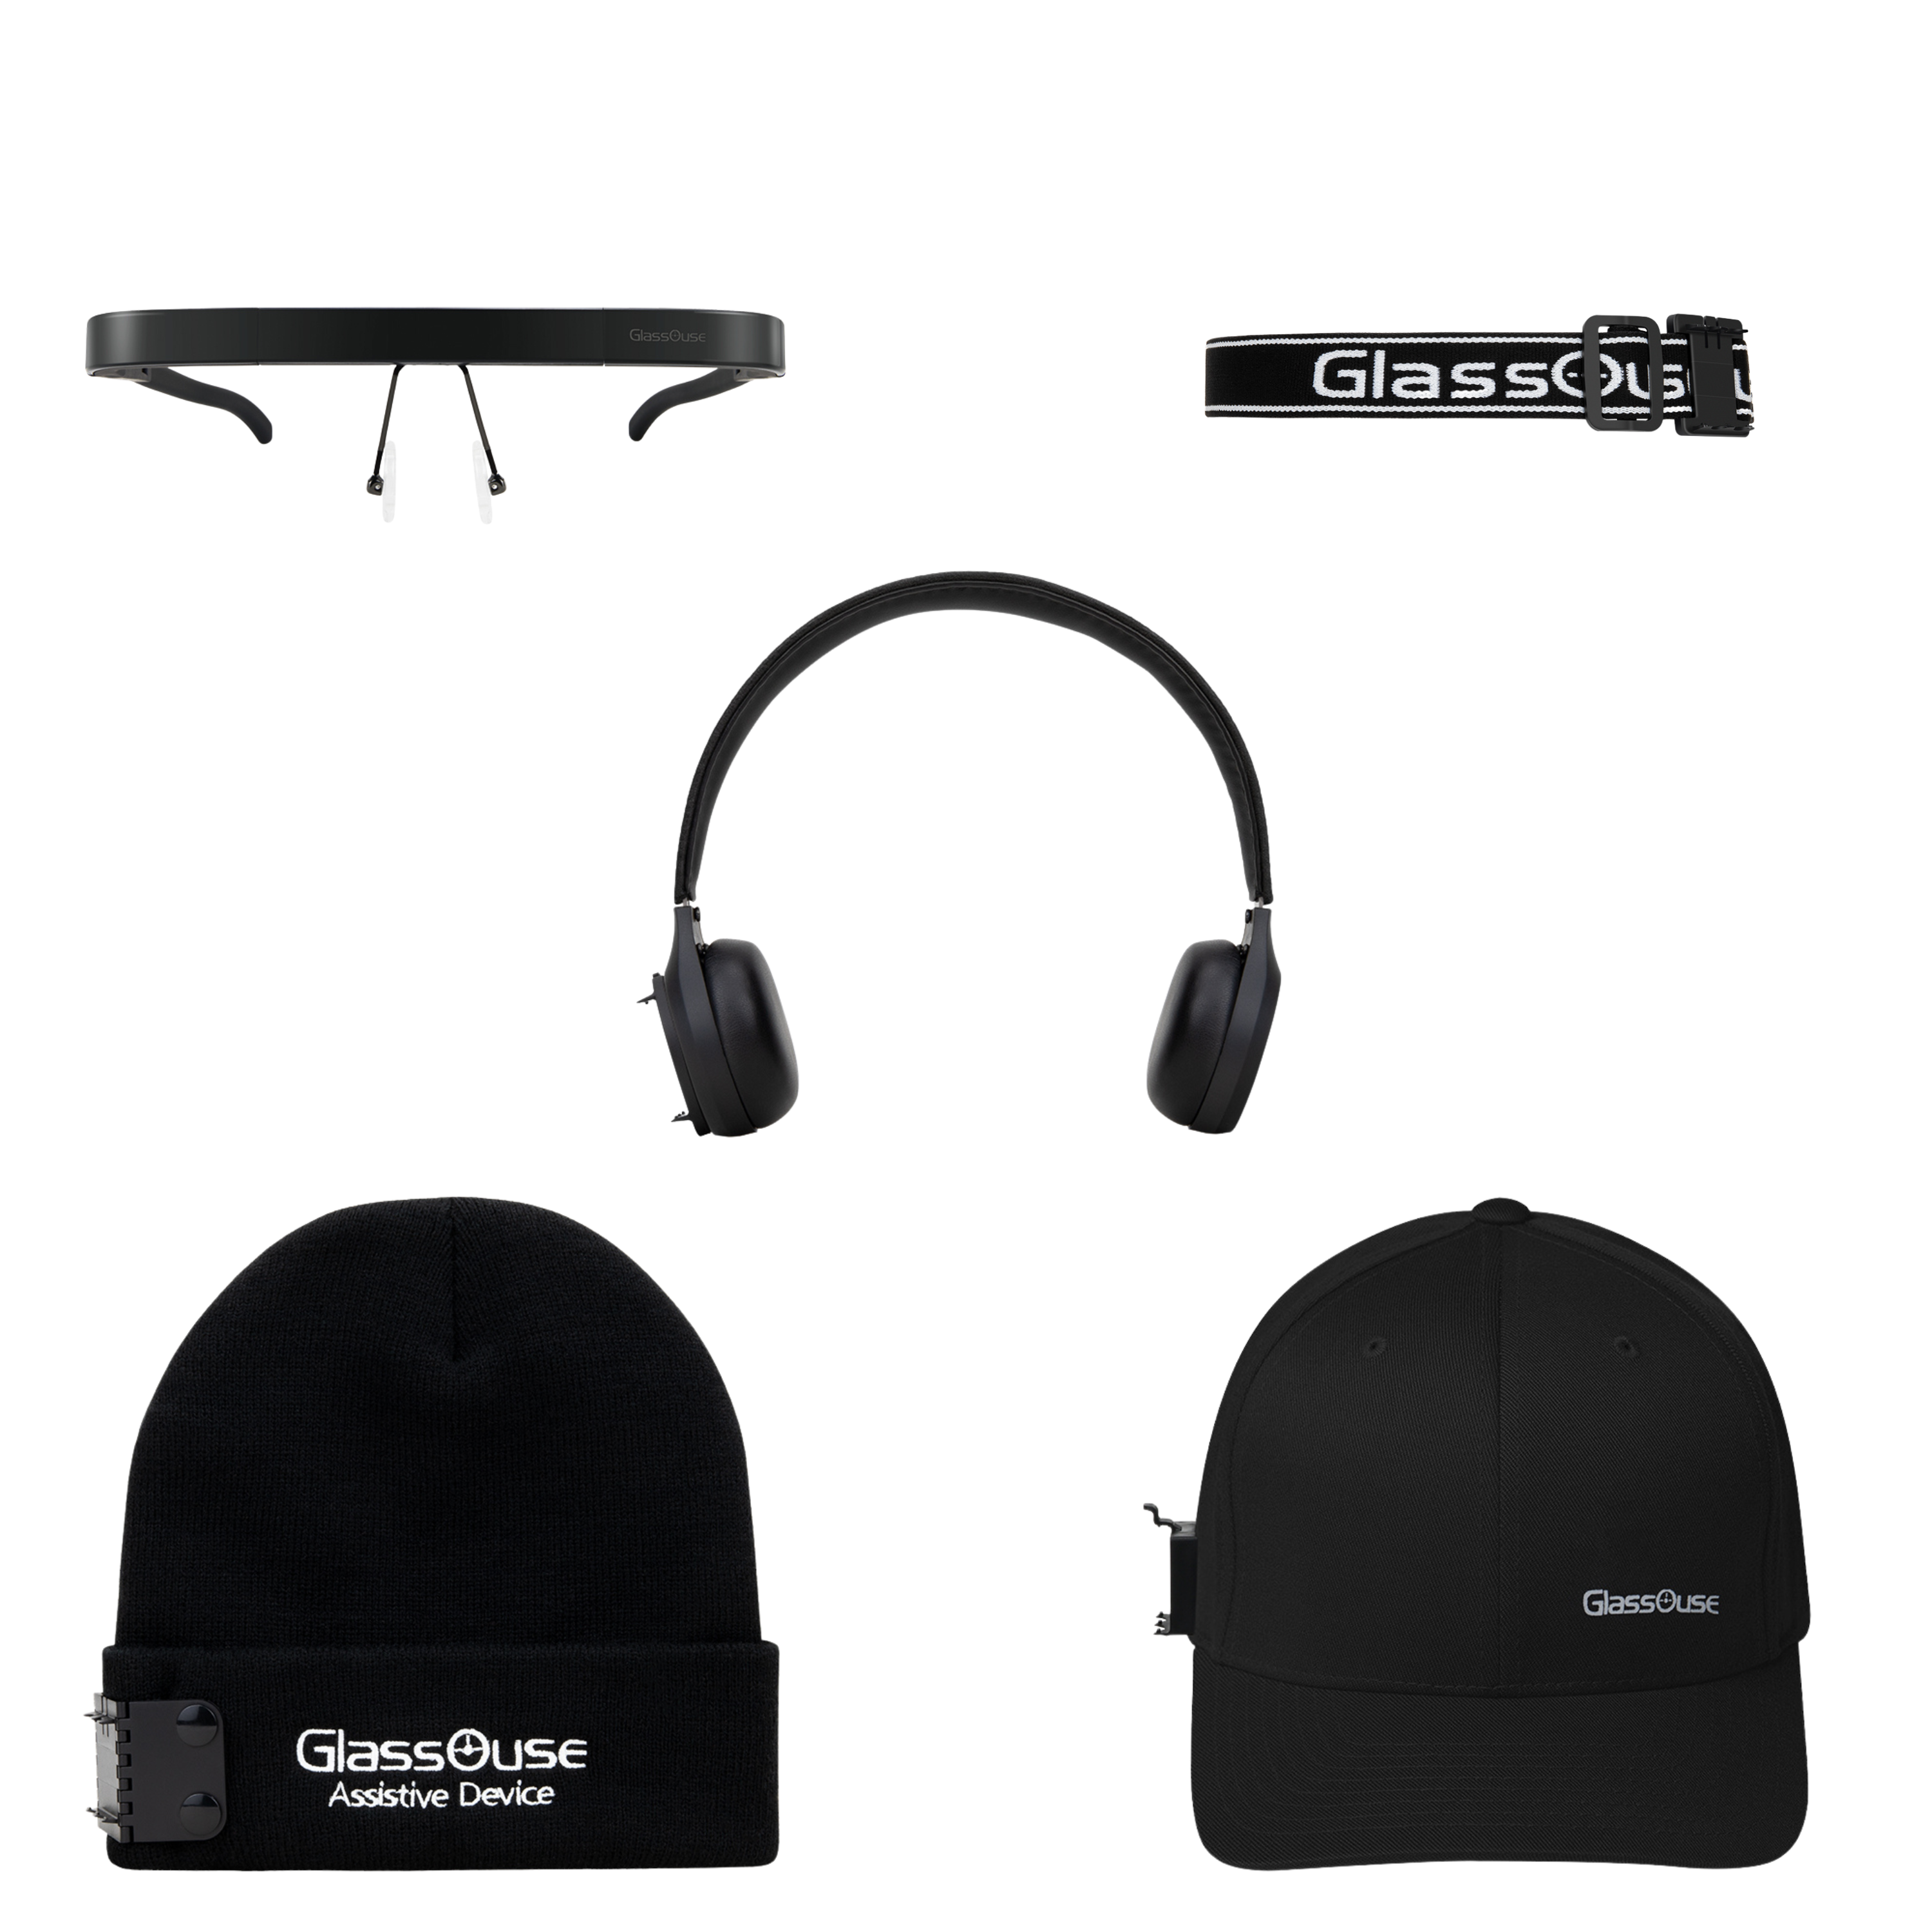 Group image of G-Wear options available